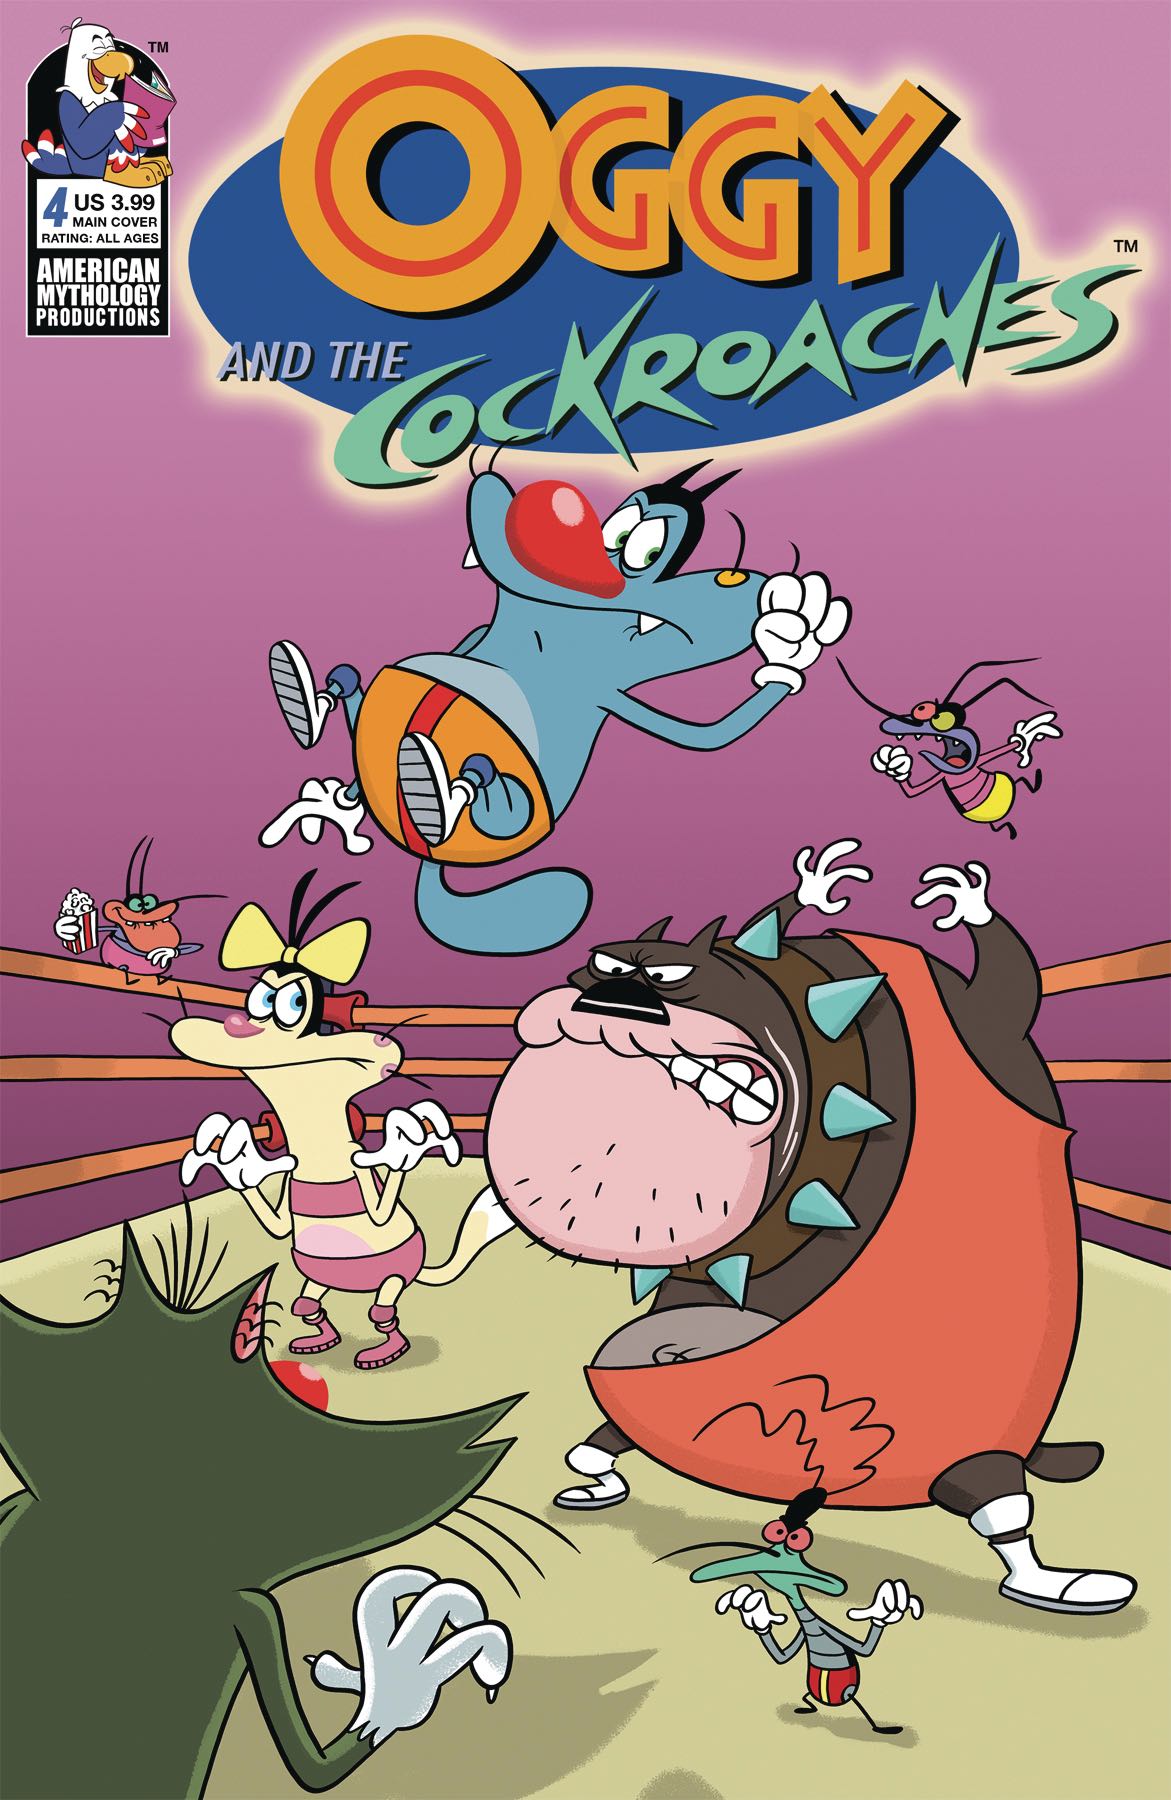 Oggy and the Cockroaches #4 (Rankine Cover) | Fresh Comics